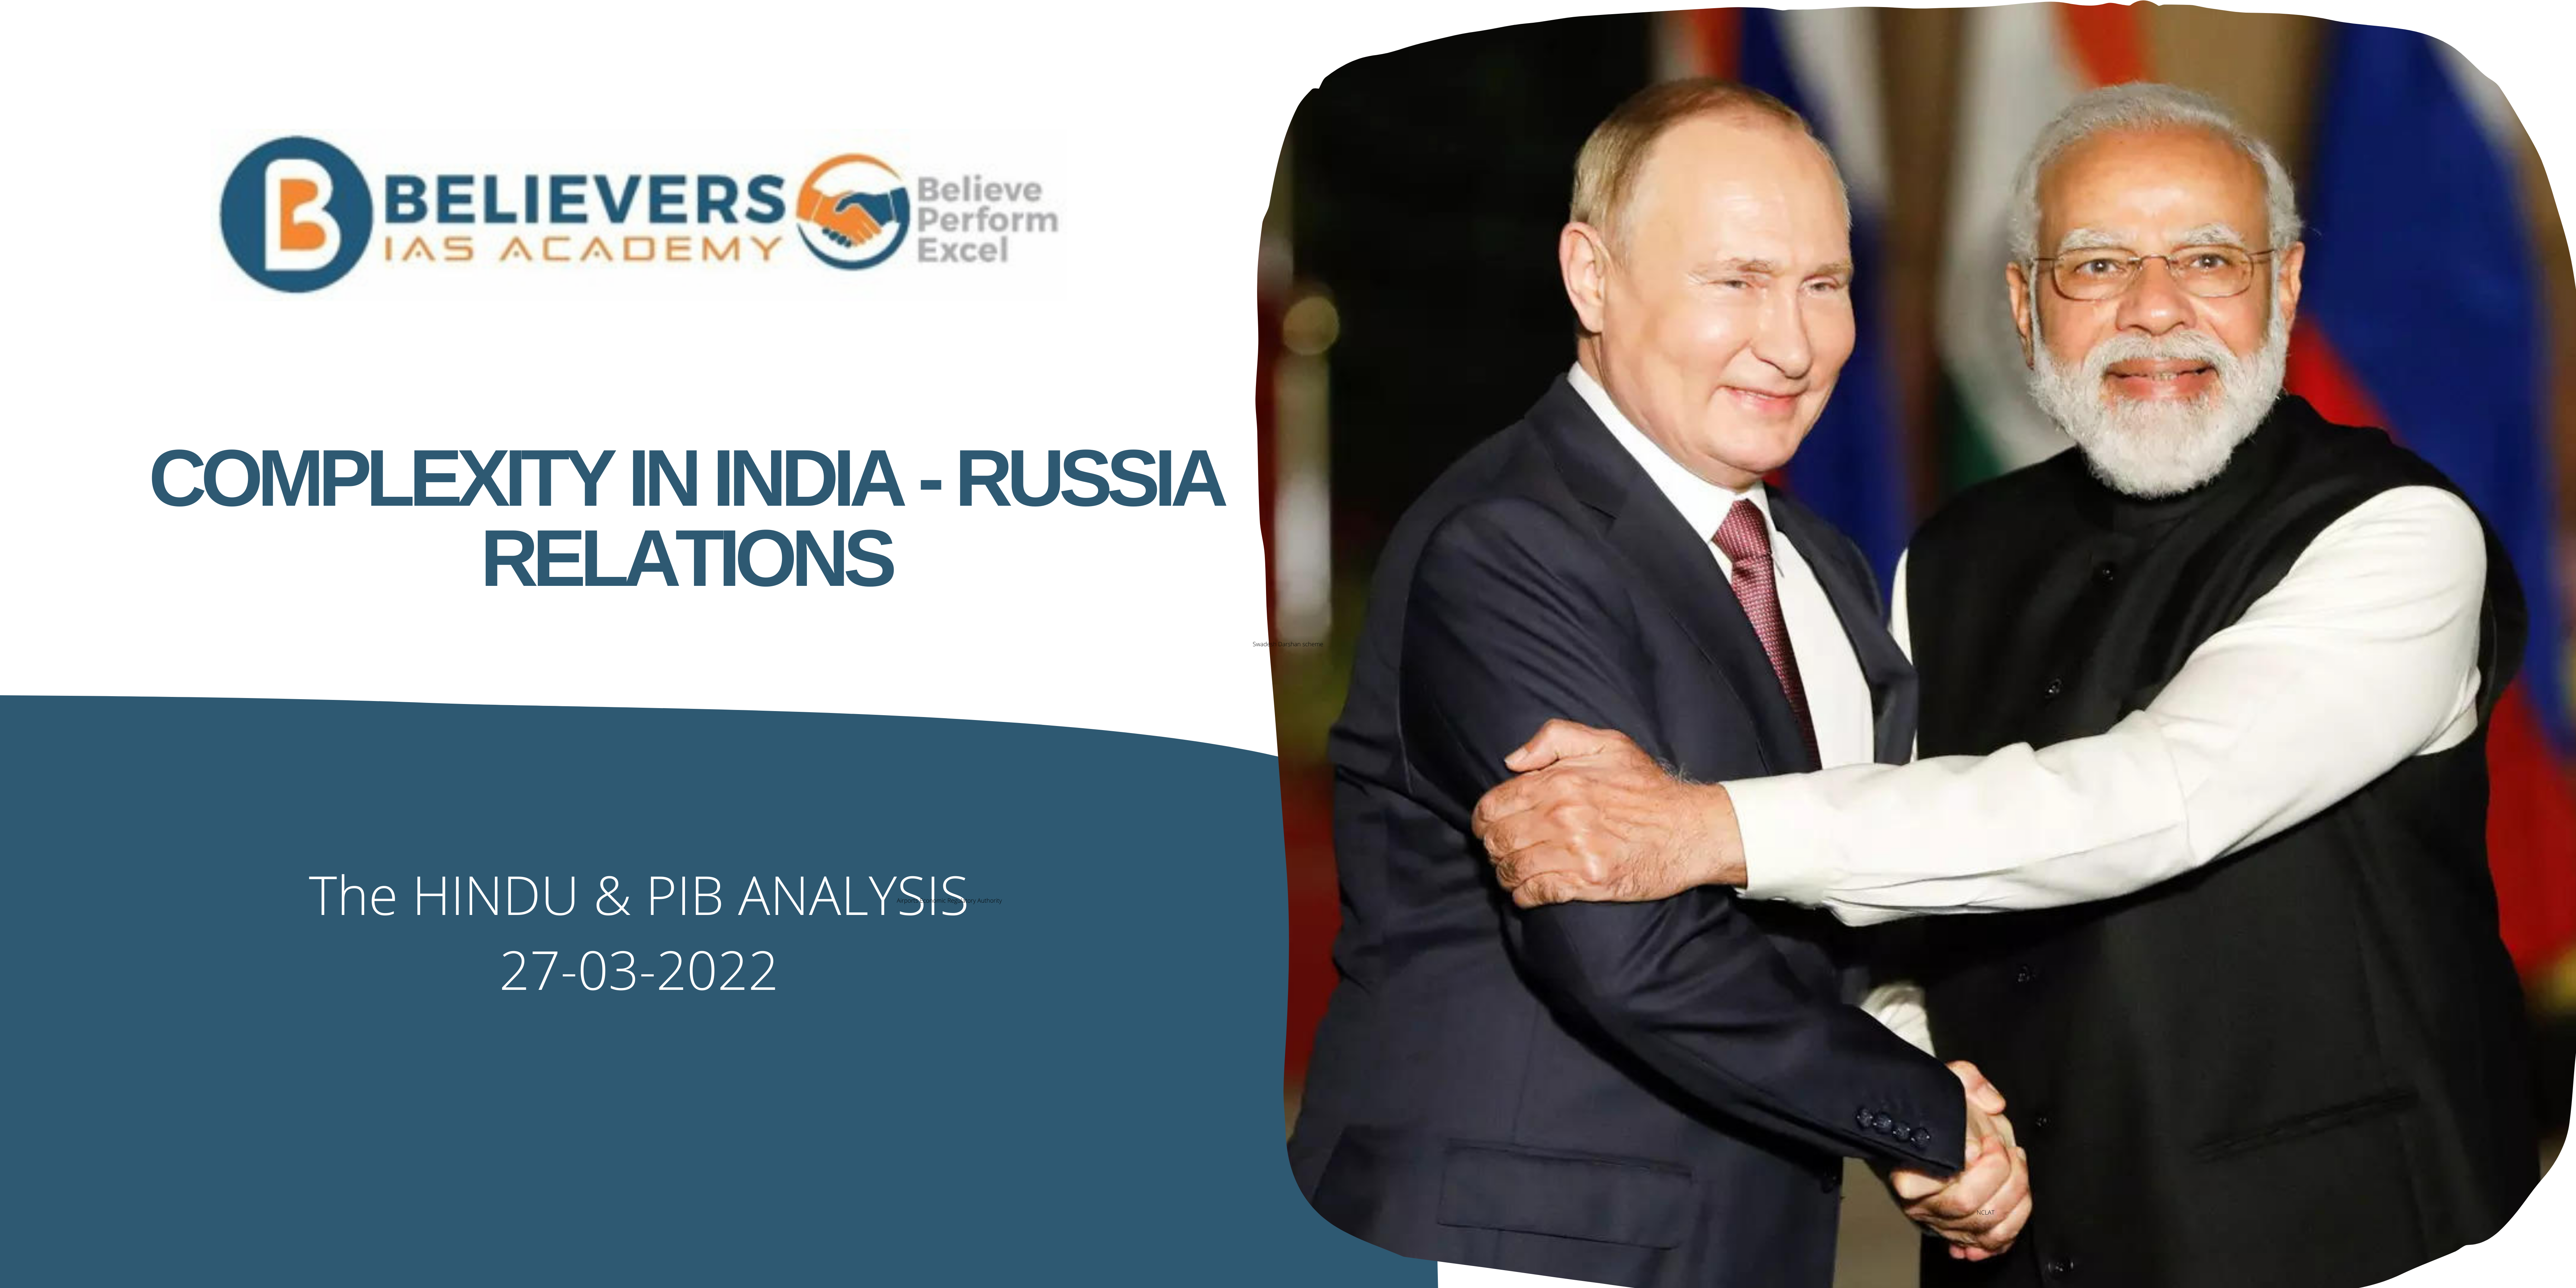 IAS Current affairs - Complexity in India - Russia relations